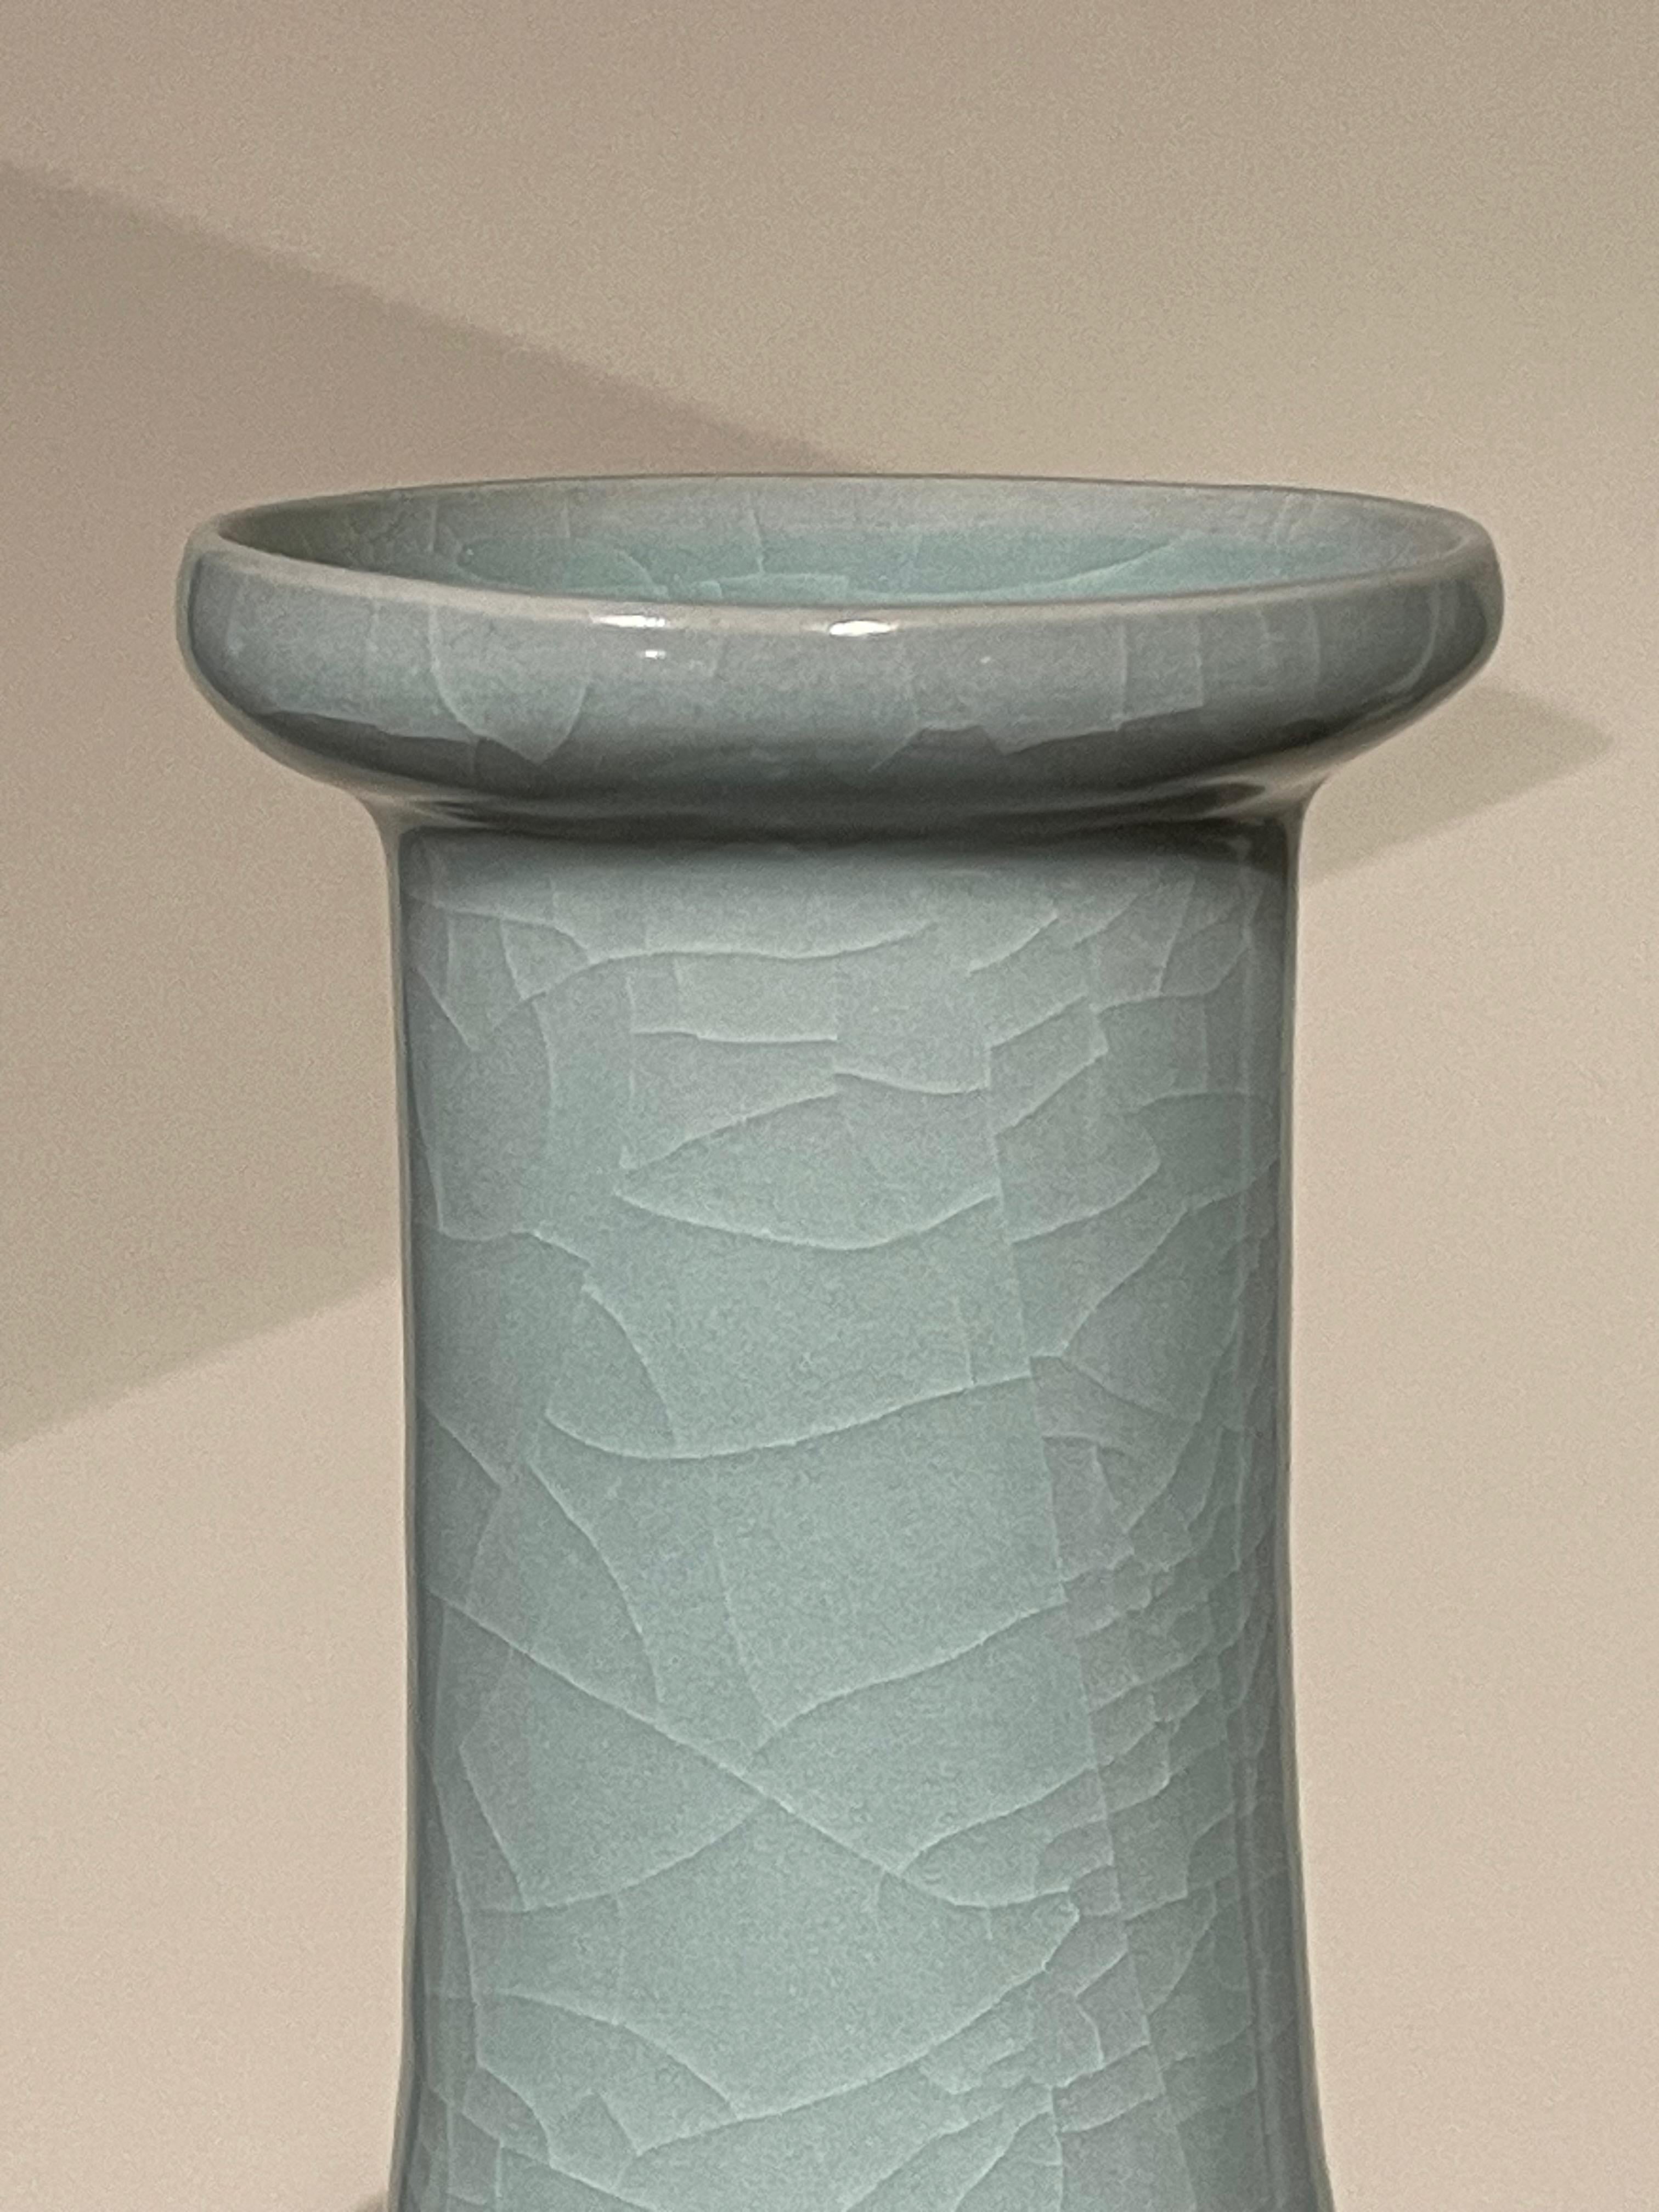 Contemporary Chinese pale turquoise vase.
Elongated neck with ribbed detail at opening.
Large collection available with varying sizes and shapes.
Sold individually.
ARRIVING AUGUST
